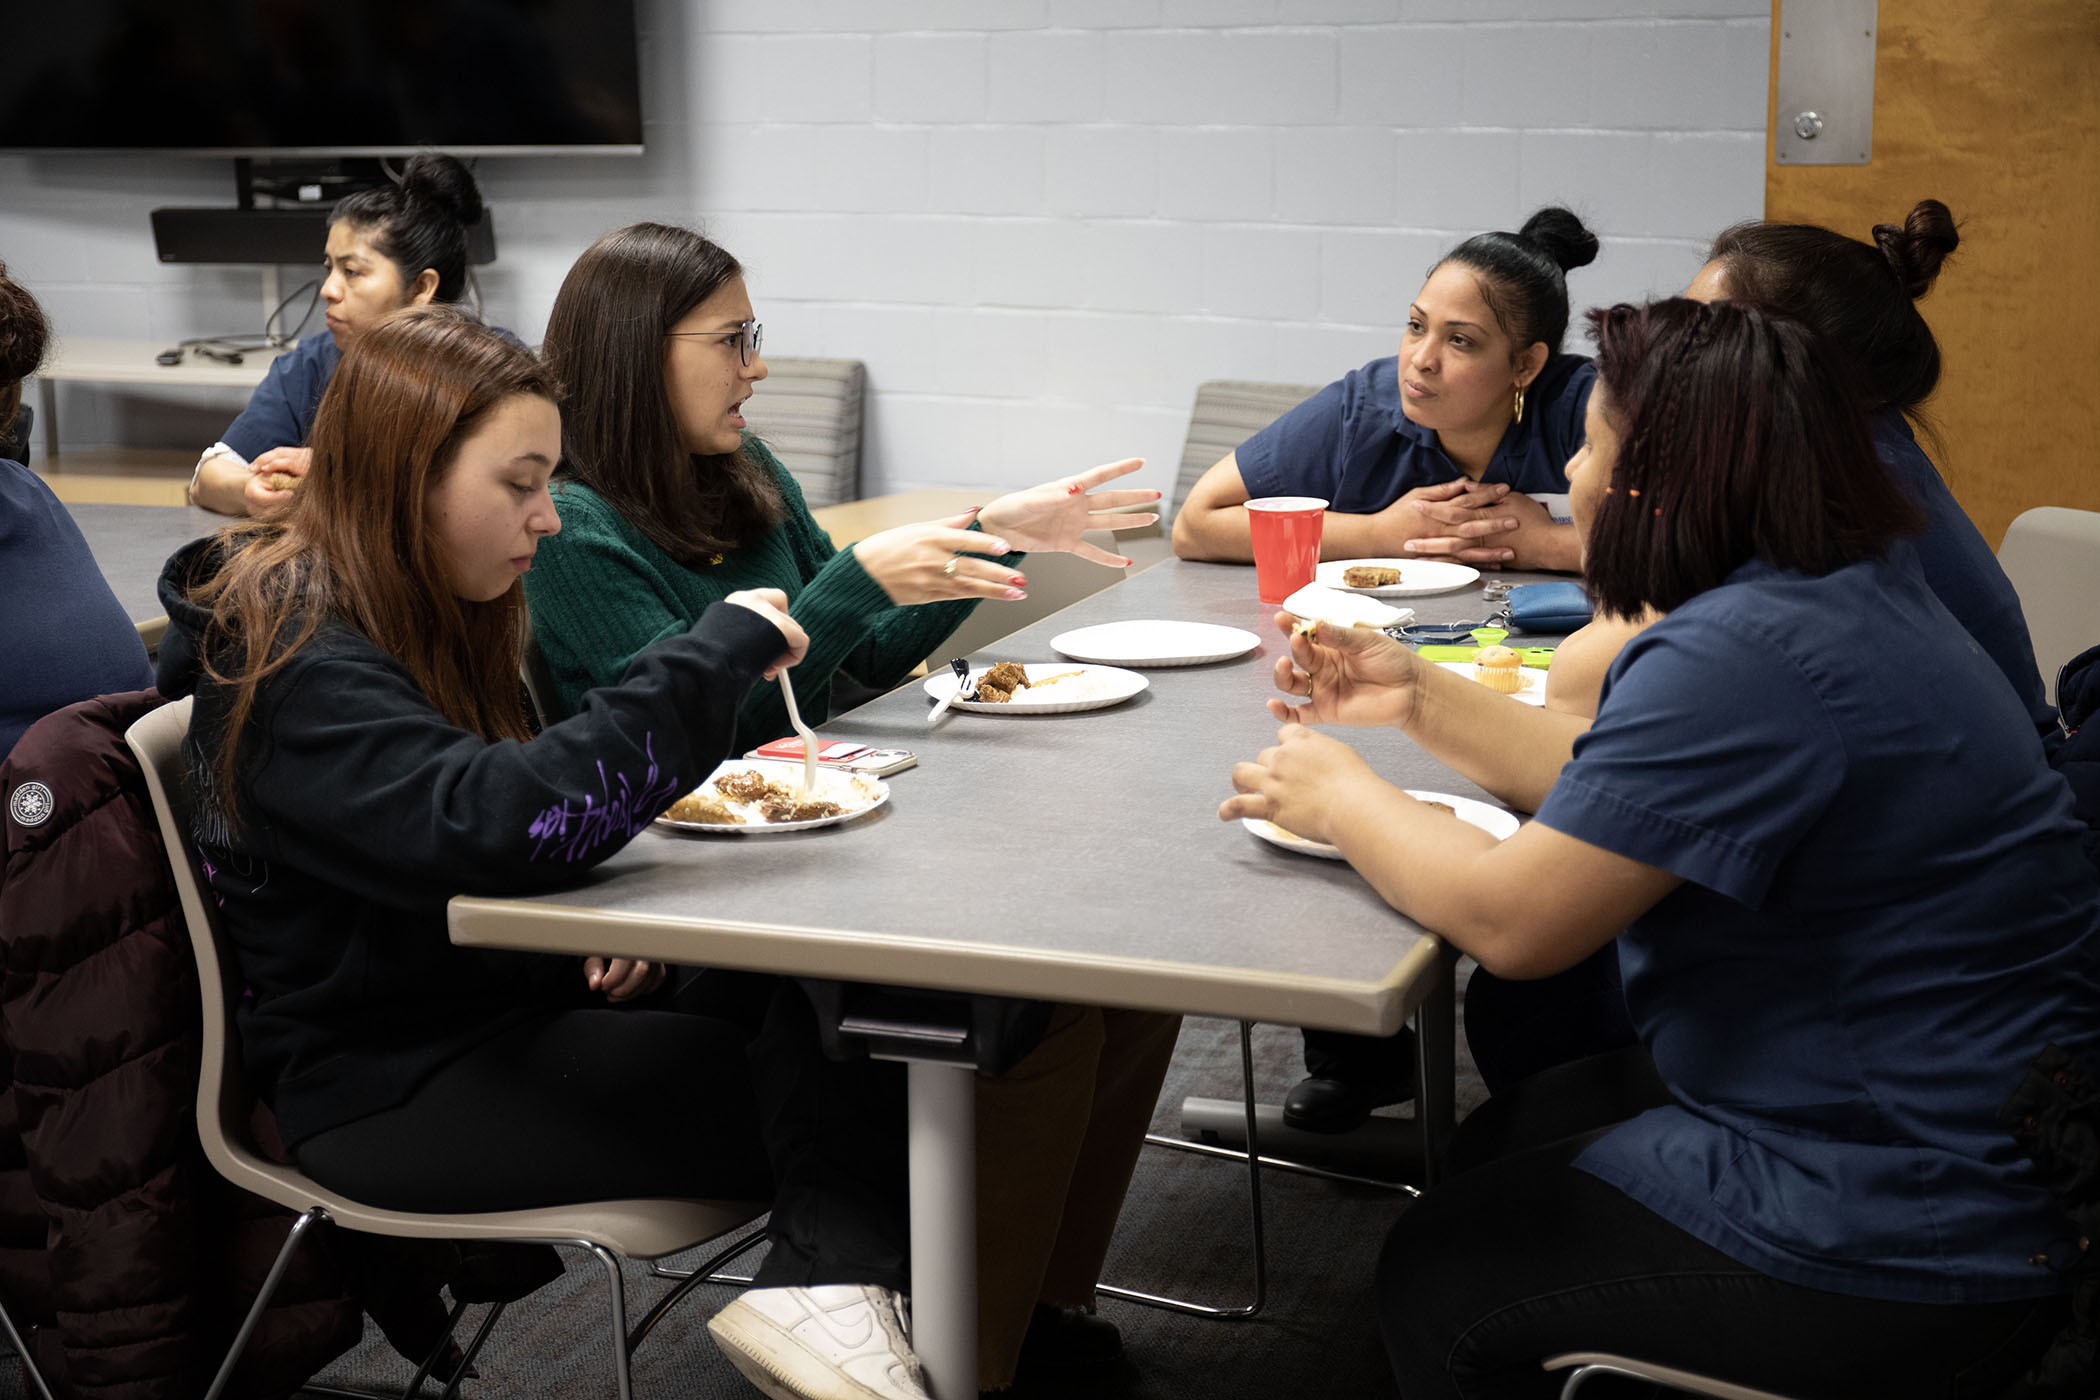 Student tutor Natalia Martínez Berríos chats with Yadira Castro and other members of staff over lunch.